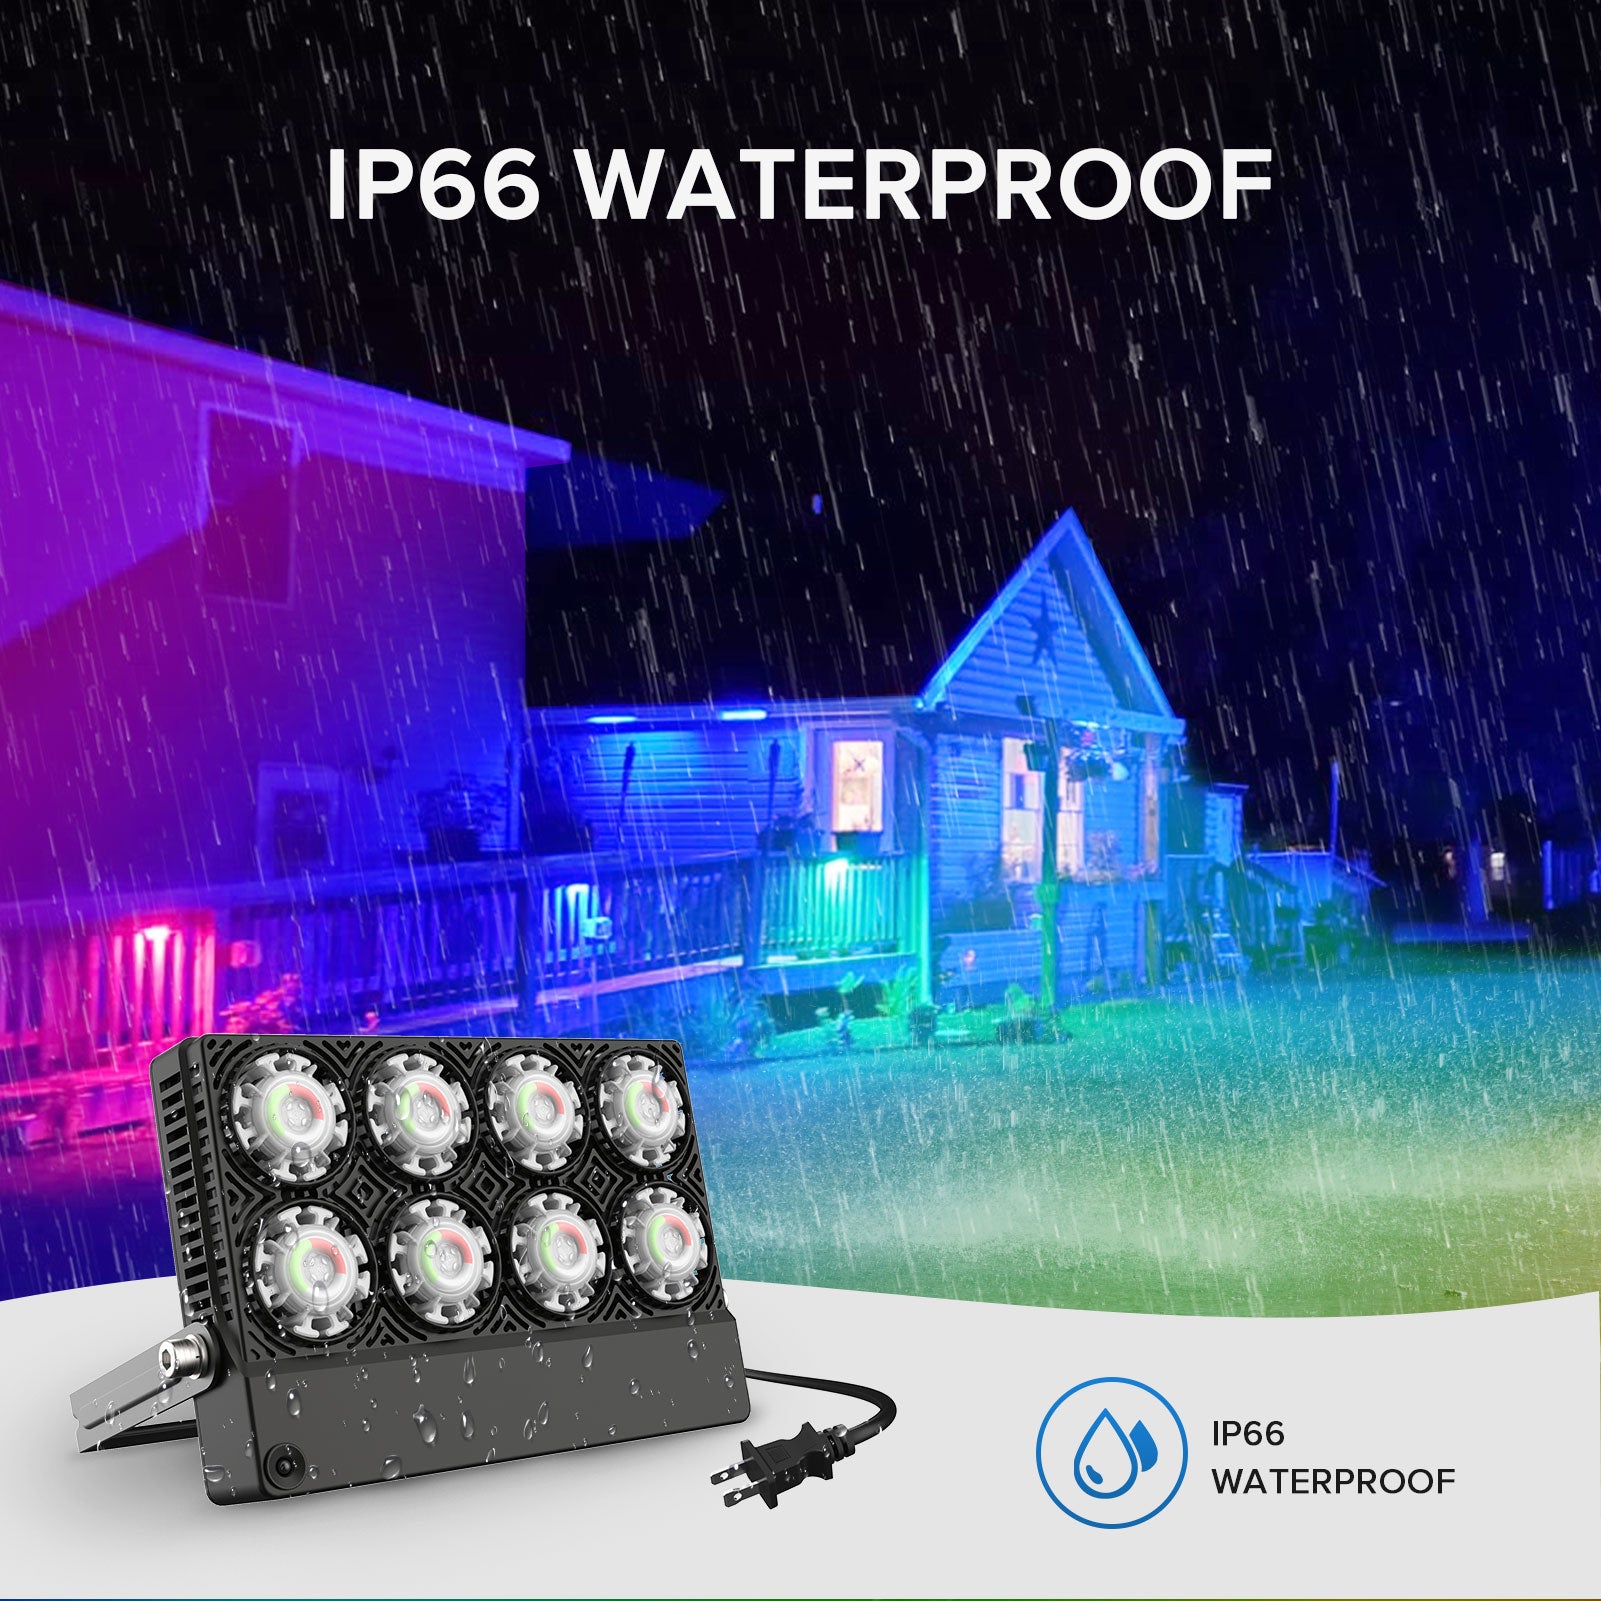 25W RGB LED Flood Light (EU ONLY) is IP66 waterproof，withstand rain and storm.